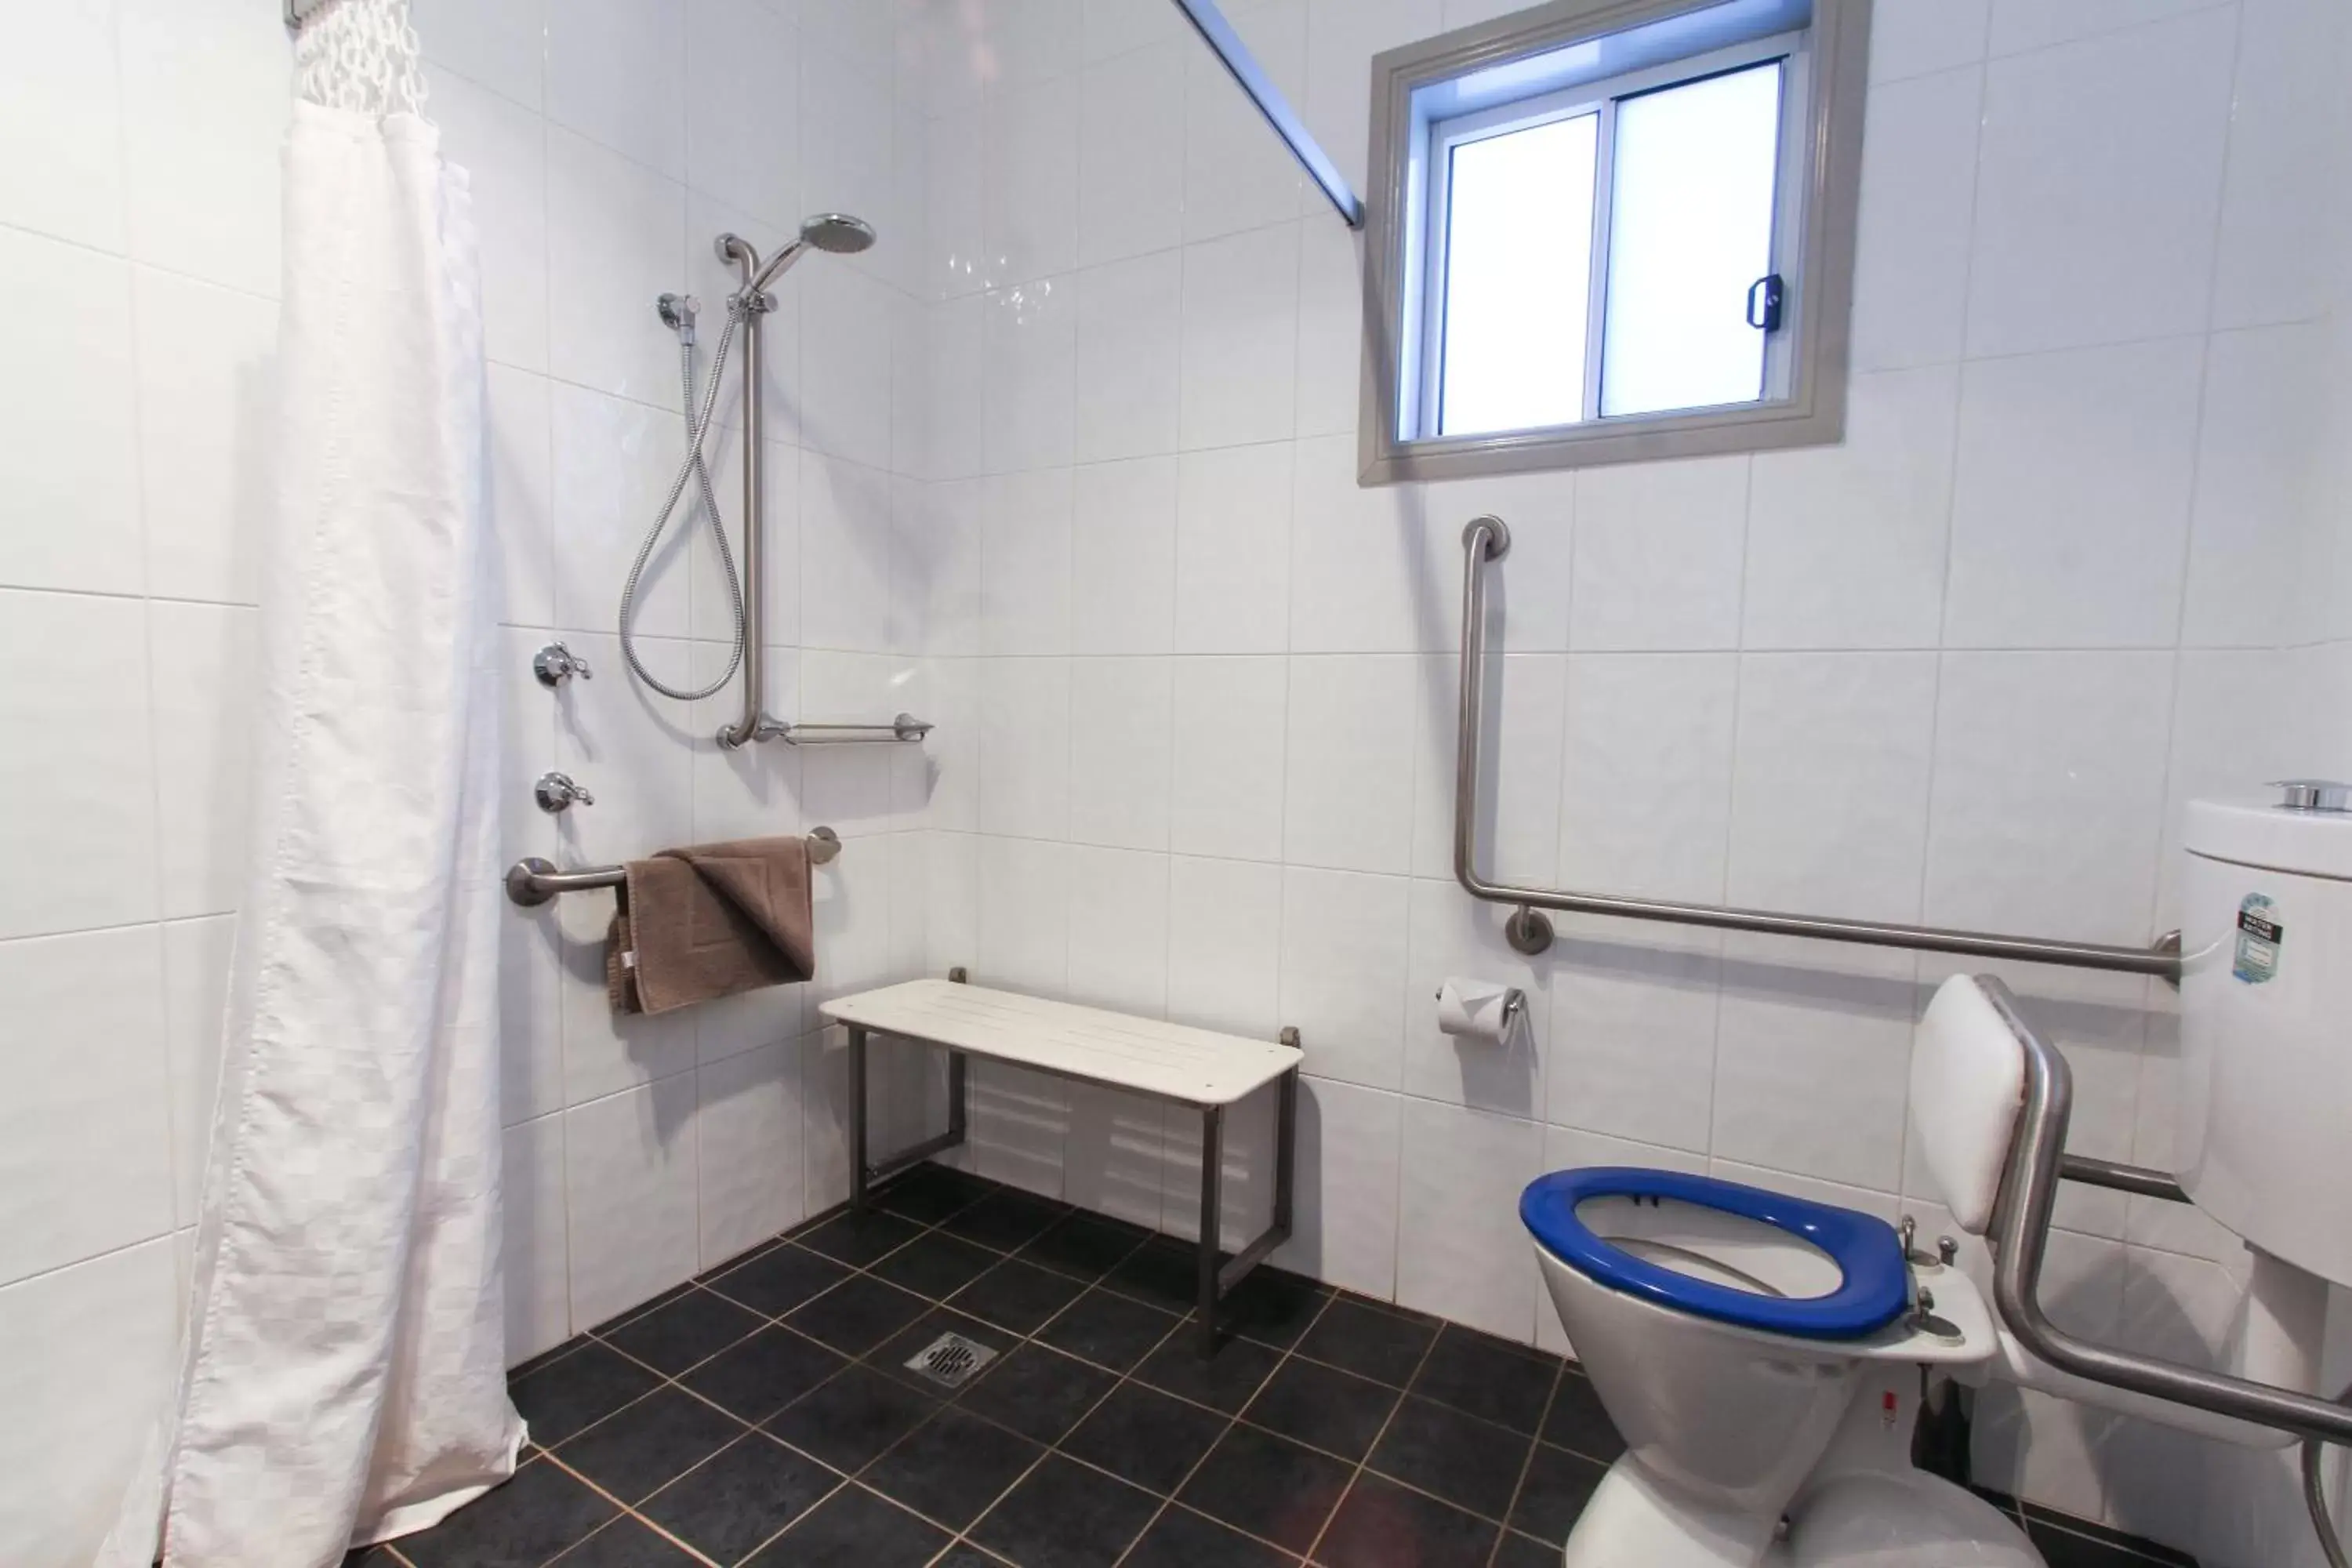 Facility for disabled guests, Bathroom in Akuna Motor Inn and Apartments